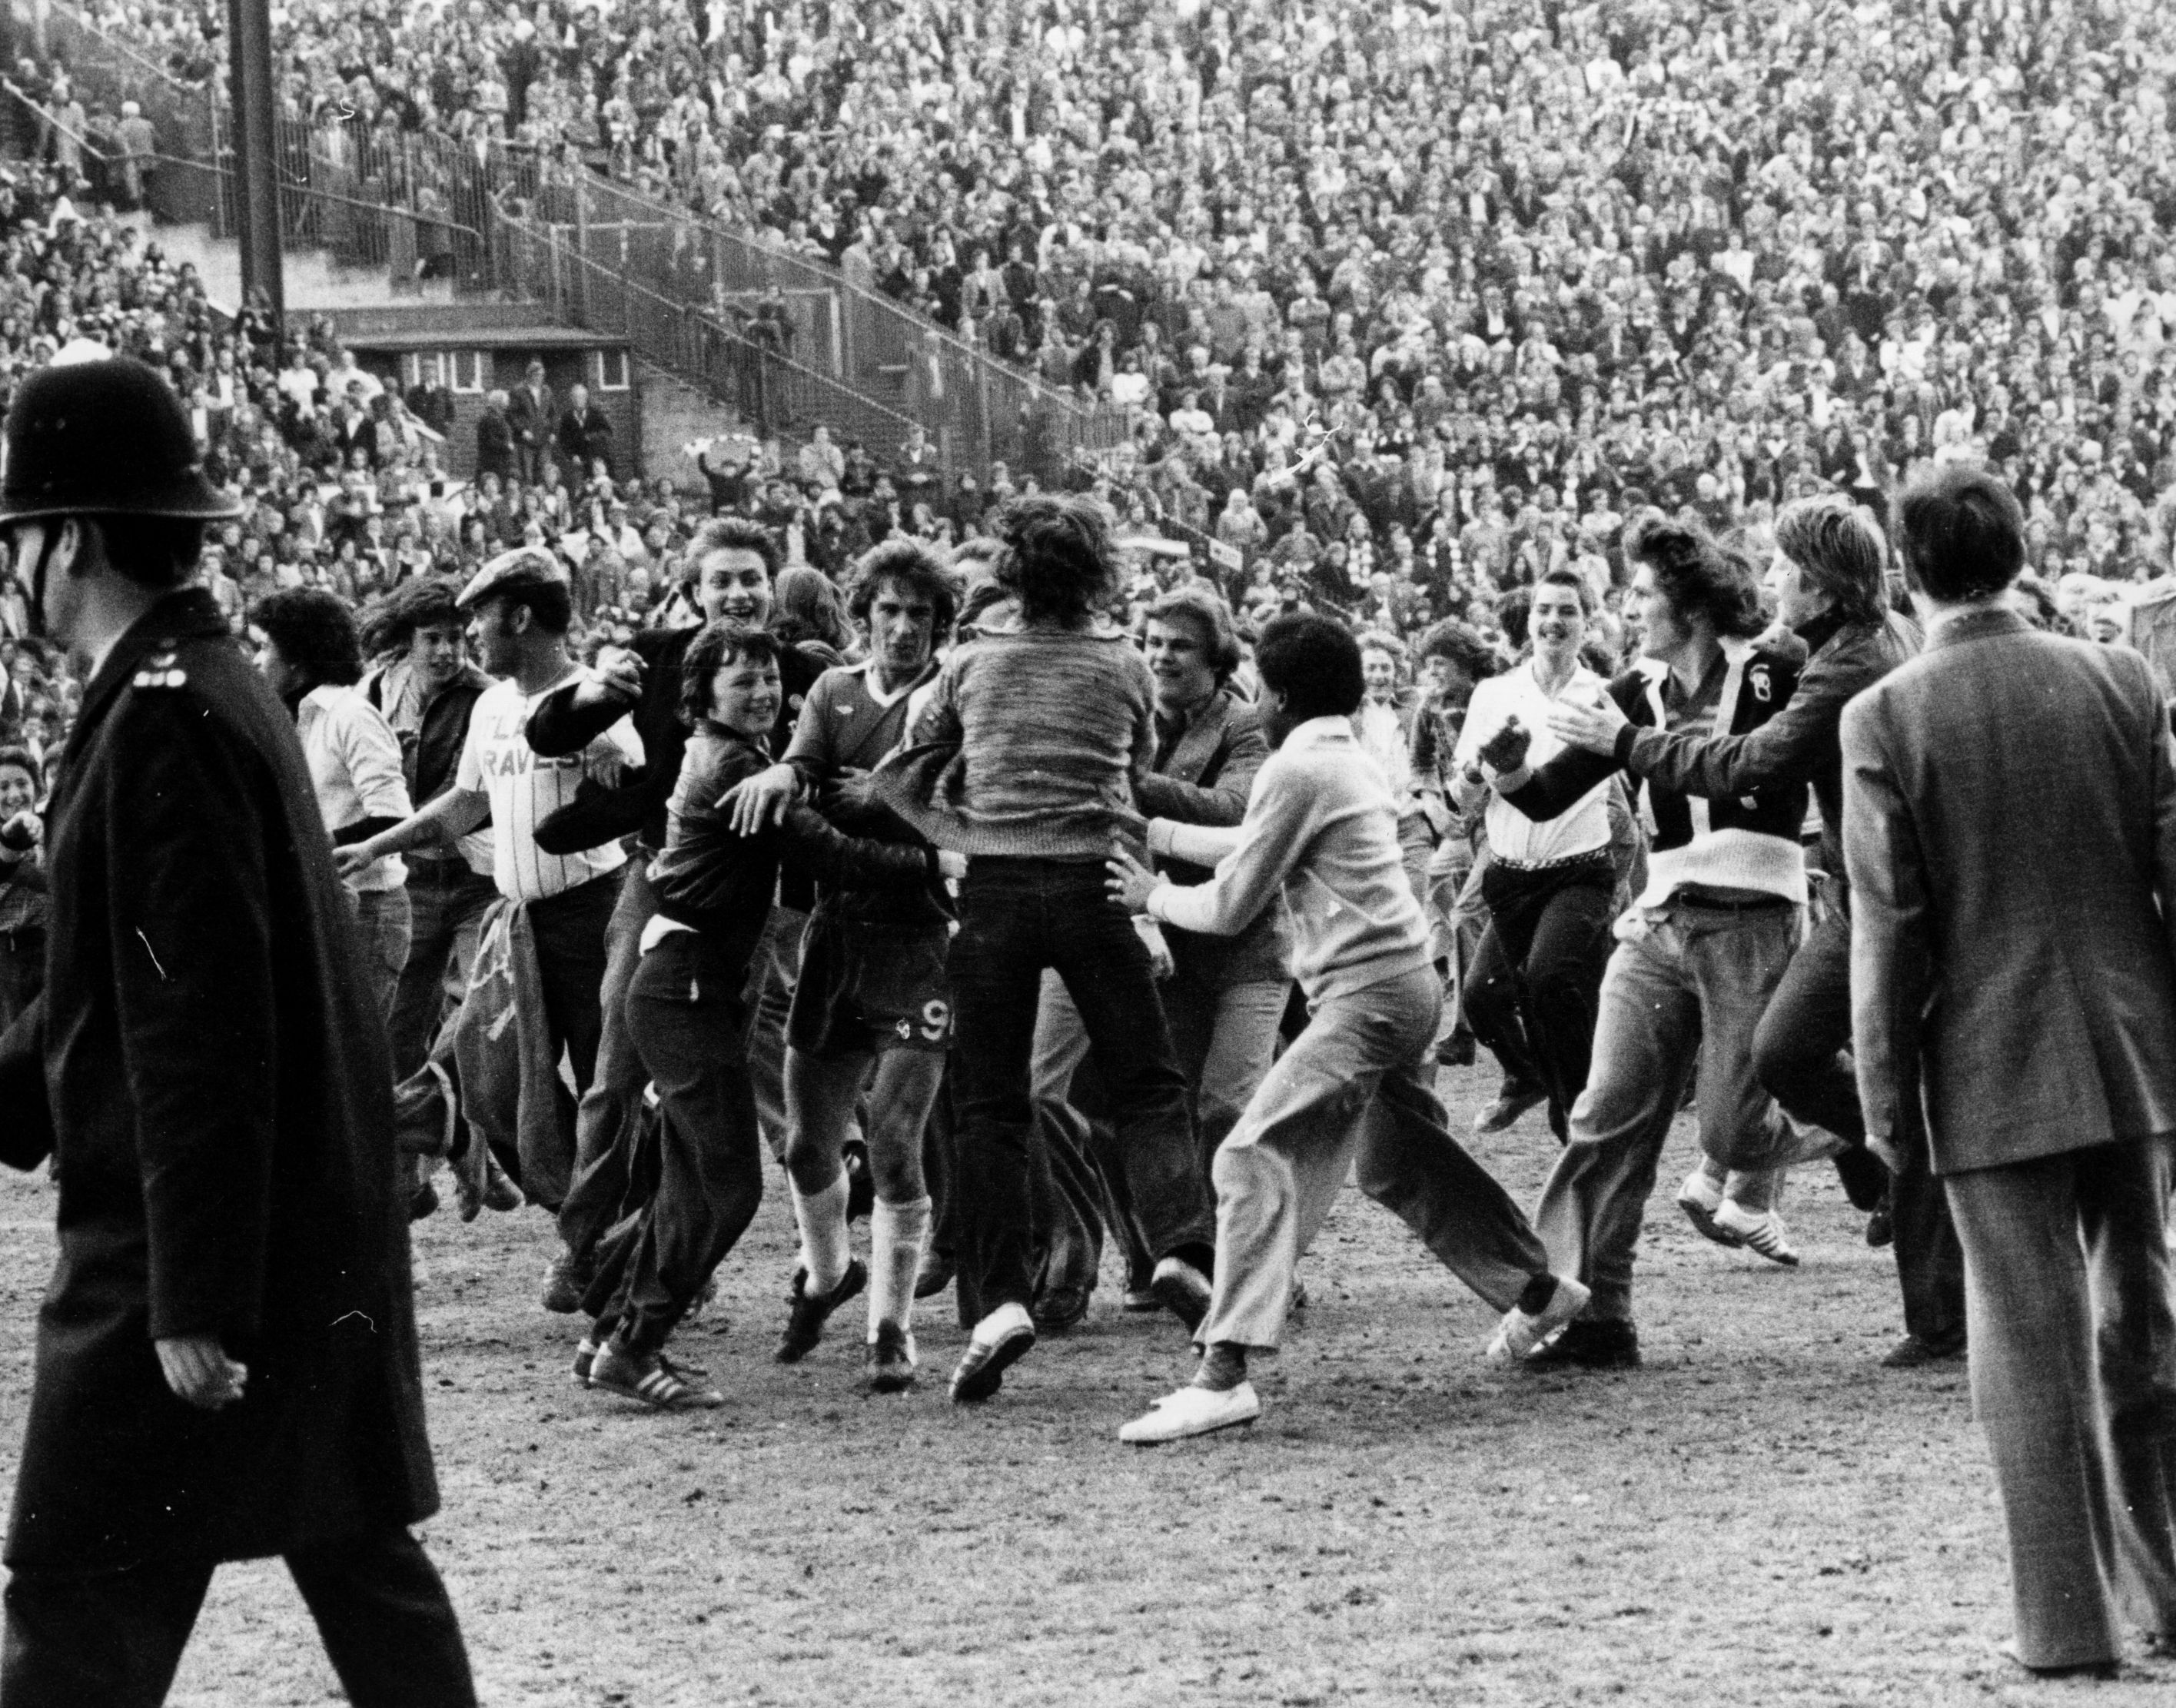 circa 1975: Sheffield United fans mob Steve Finneston as he tries to leave the football pitch. (Photo by Hulton Archive/Getty Images)